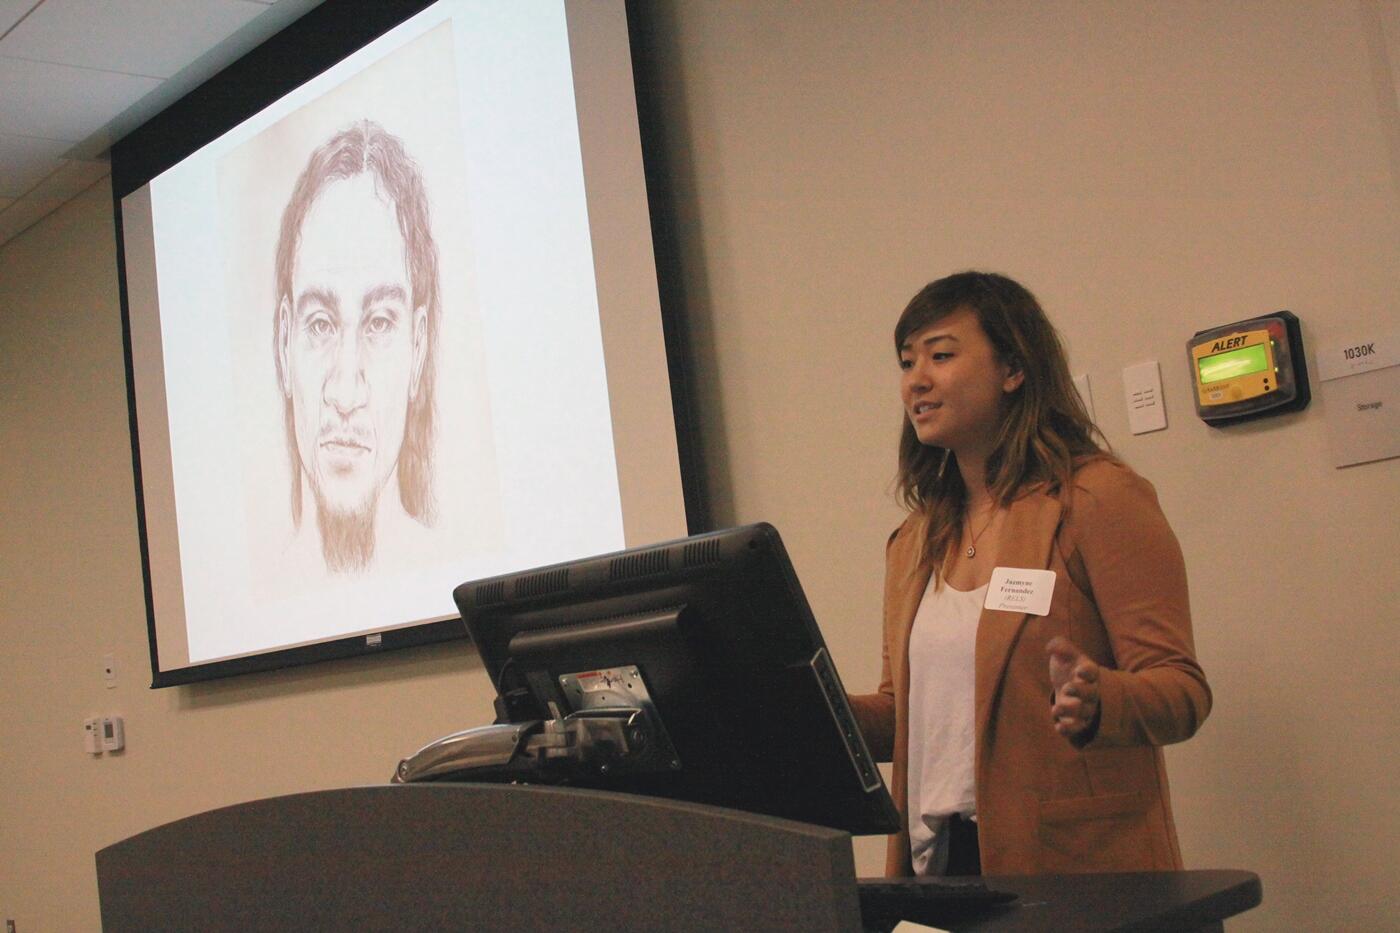 Jazmyne Fernandez, a senior religious studies major, talked about her research project, “Carytown Jesus,” during the School of World Studies Senior Research Symposium and Poster Exhibition. The composite sketch of Jesus is based on a survey of people in Carytown who were asked what Jesus looked like.